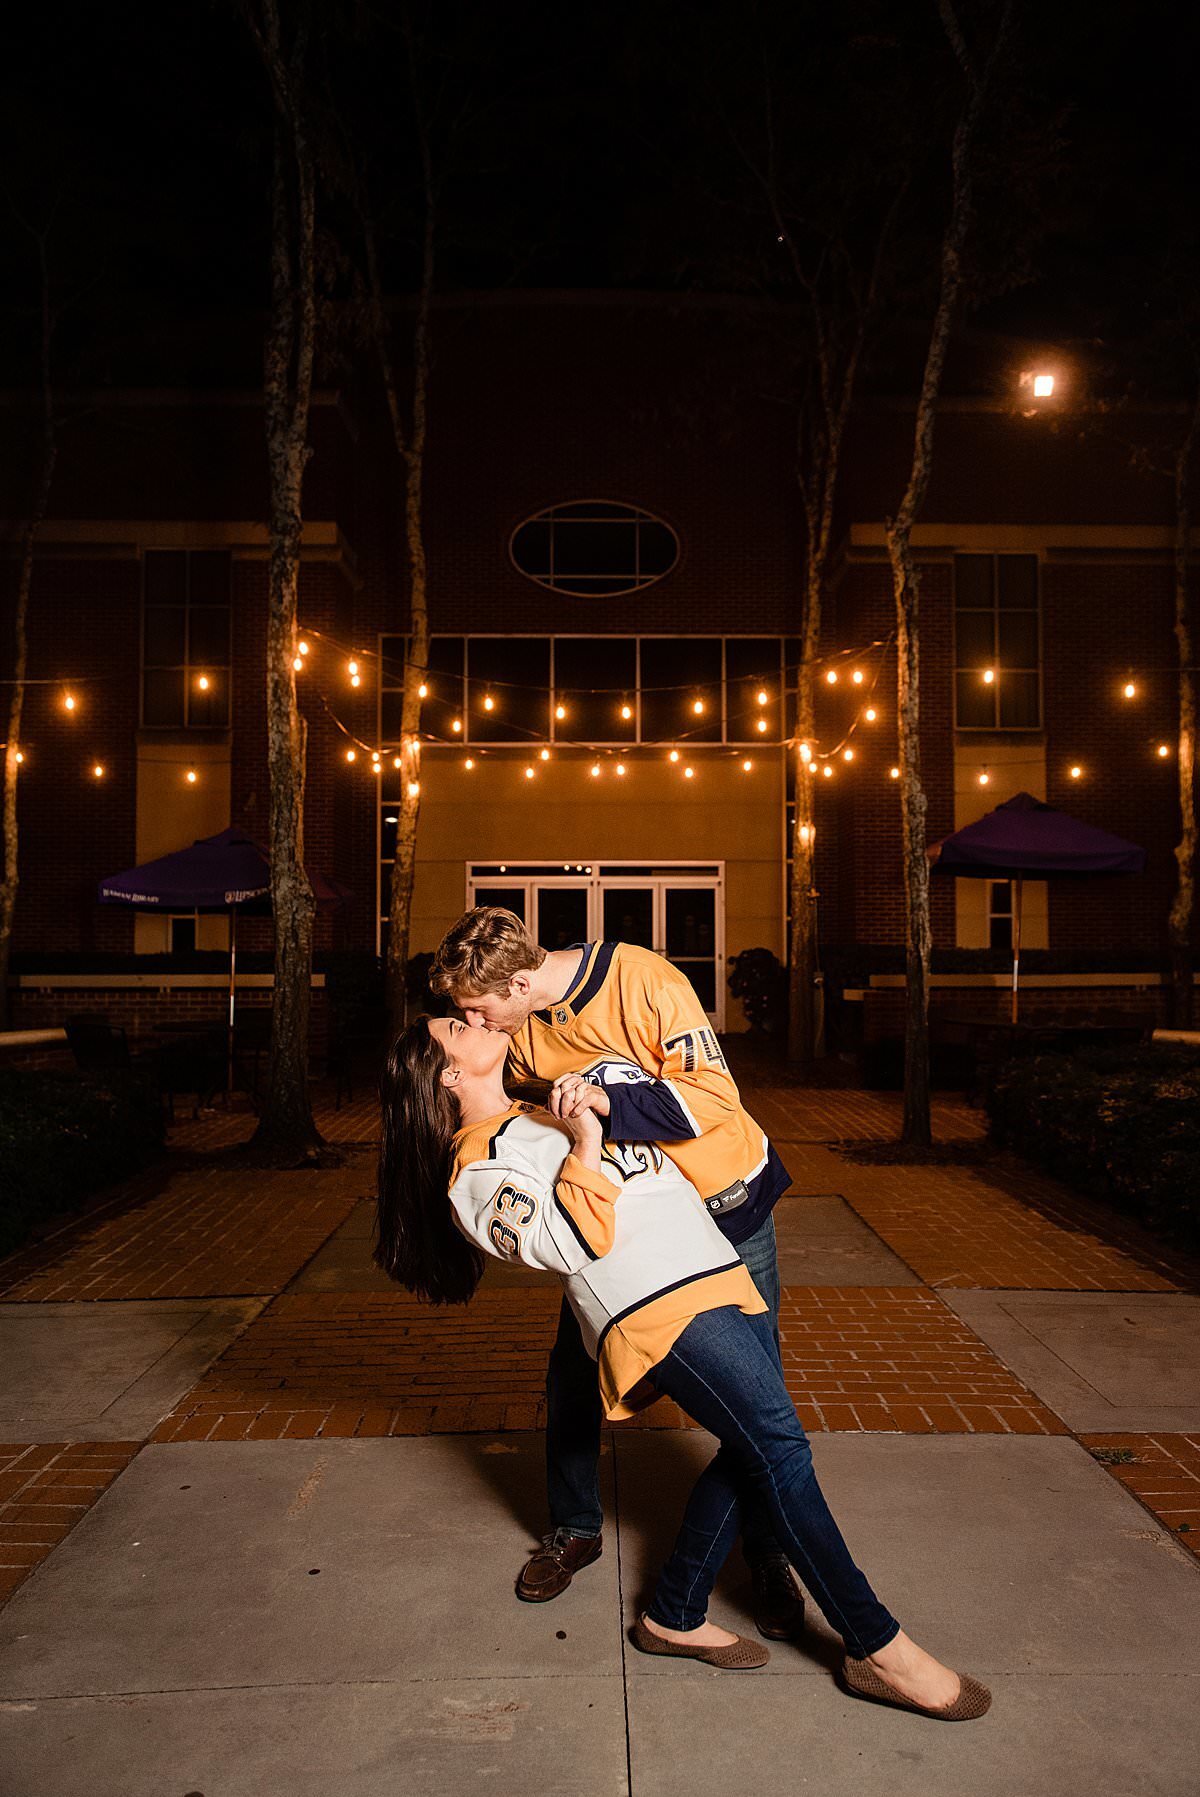 Couple wearing their Nashville predator jerseys in a courtyard at night with bistro lights in the background